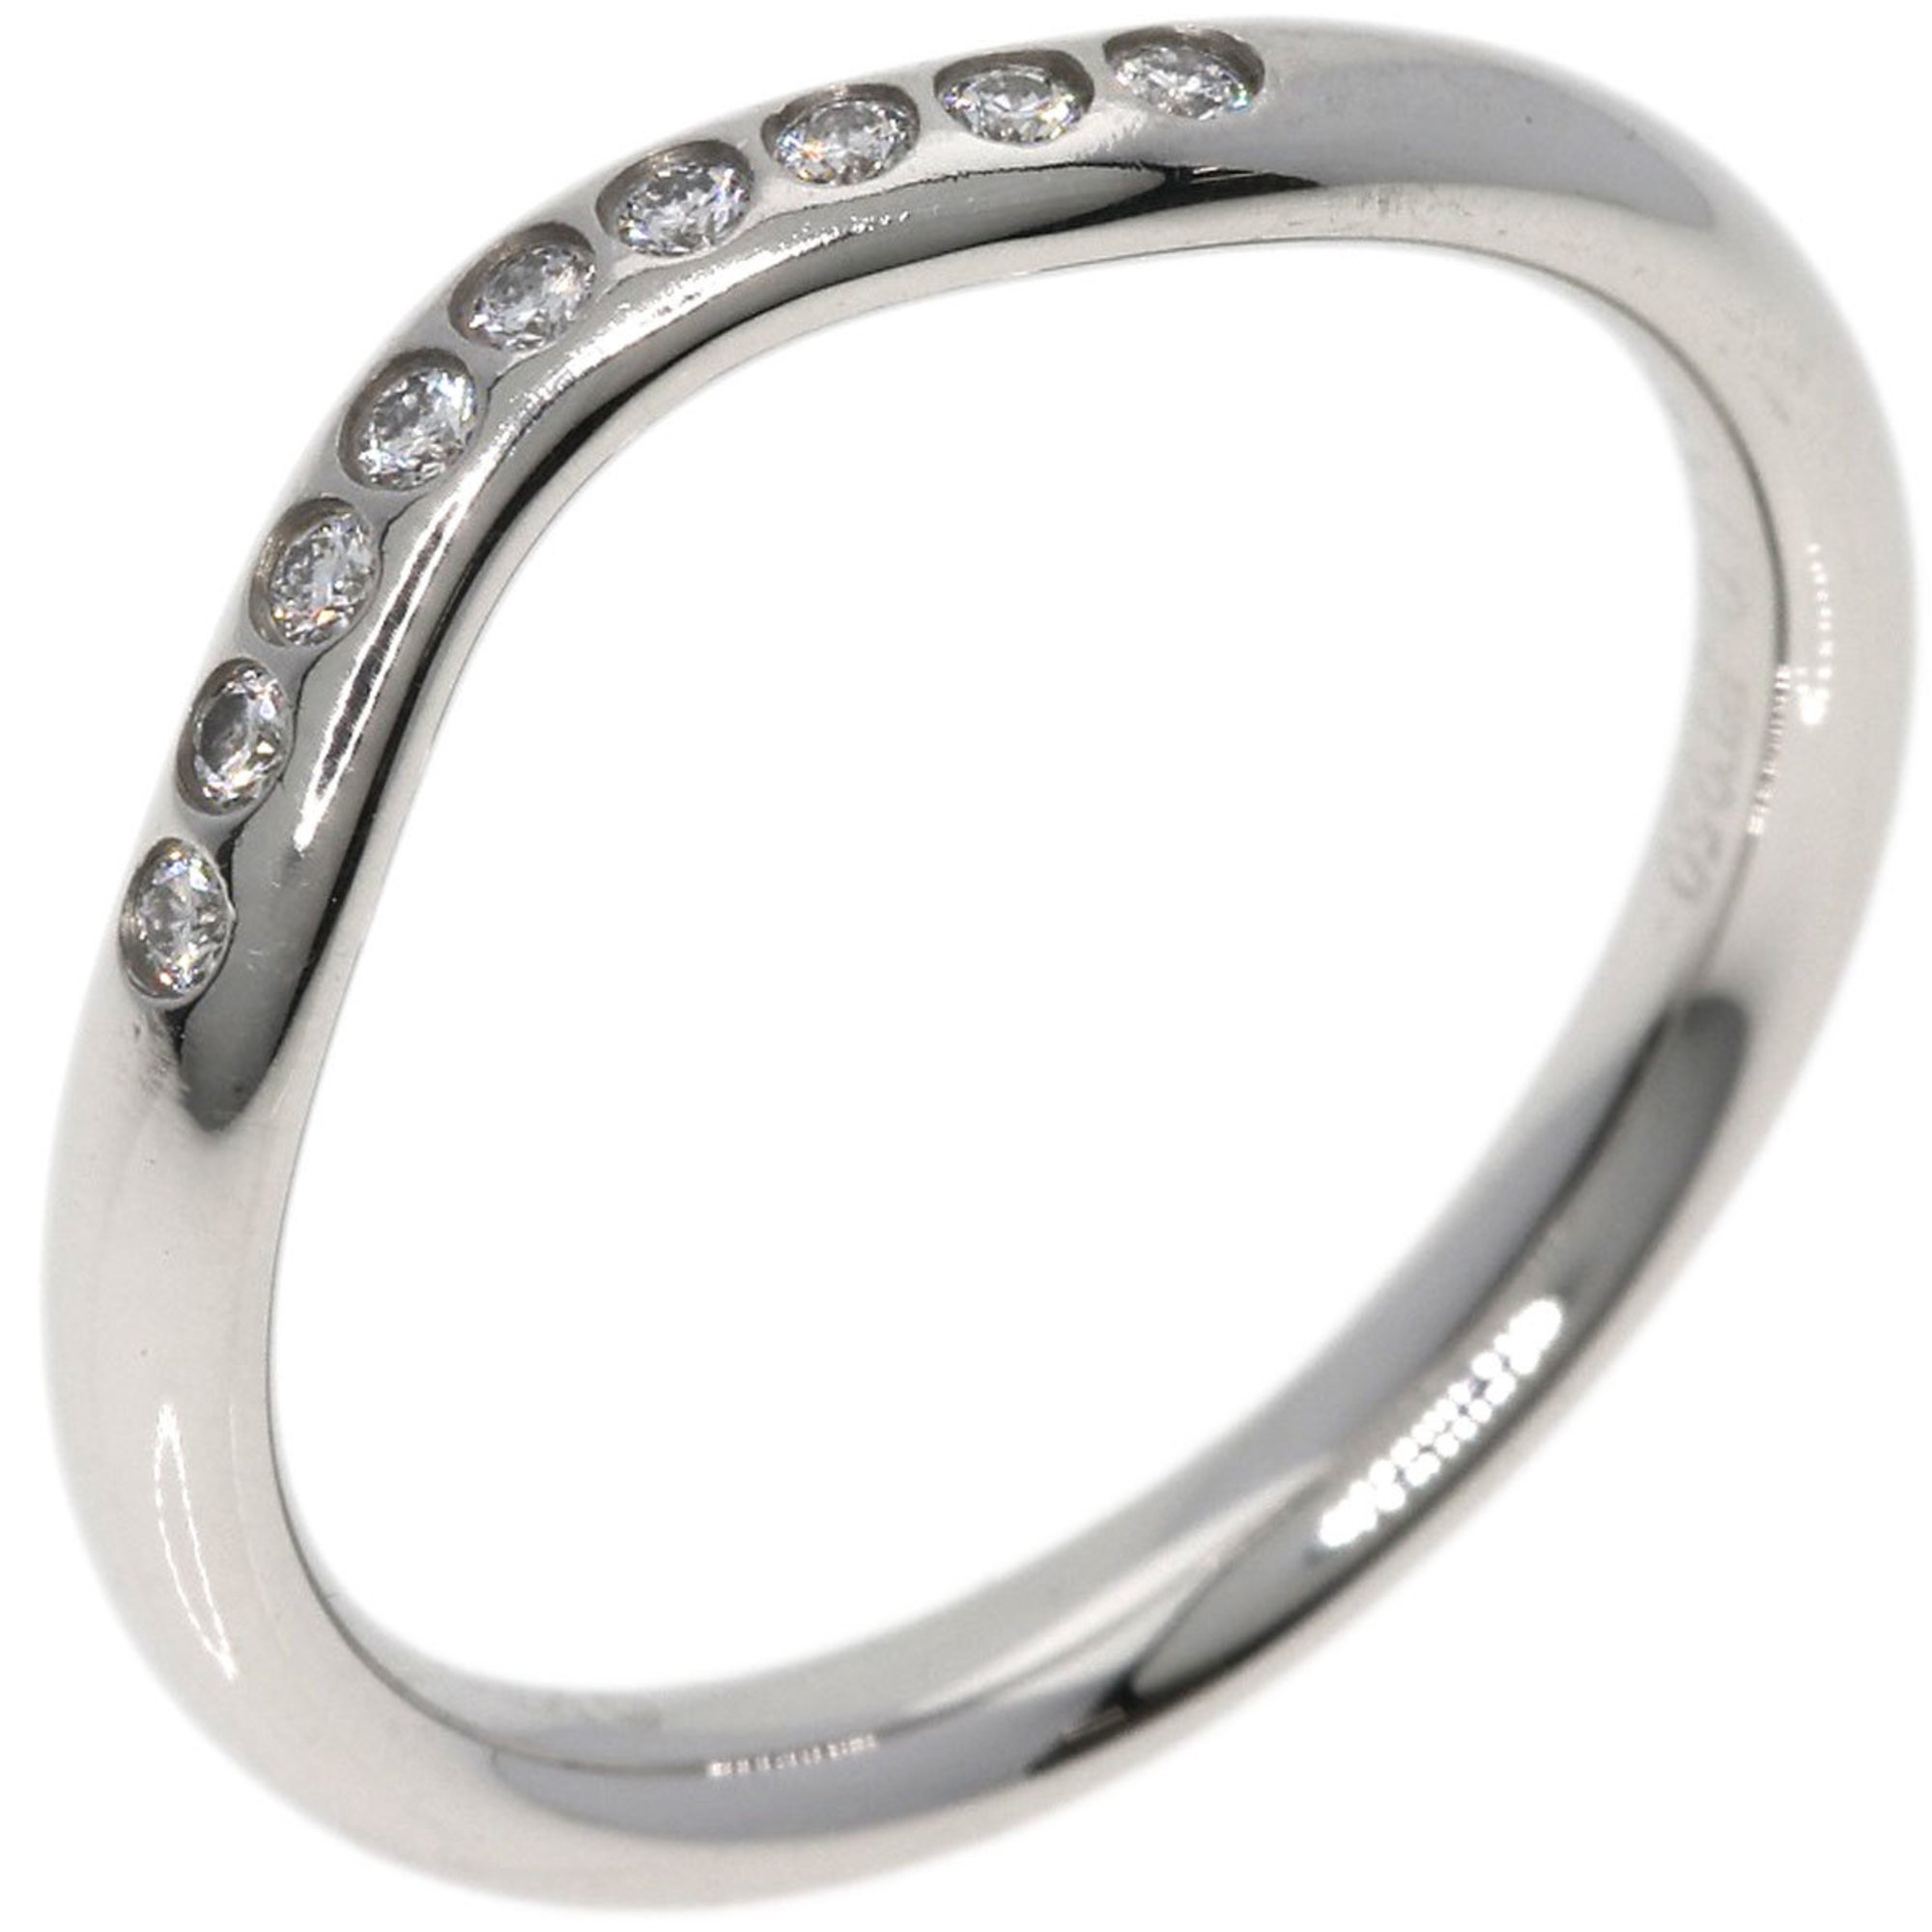 Tiffany curved band diamond ring, platinum PT950, for women